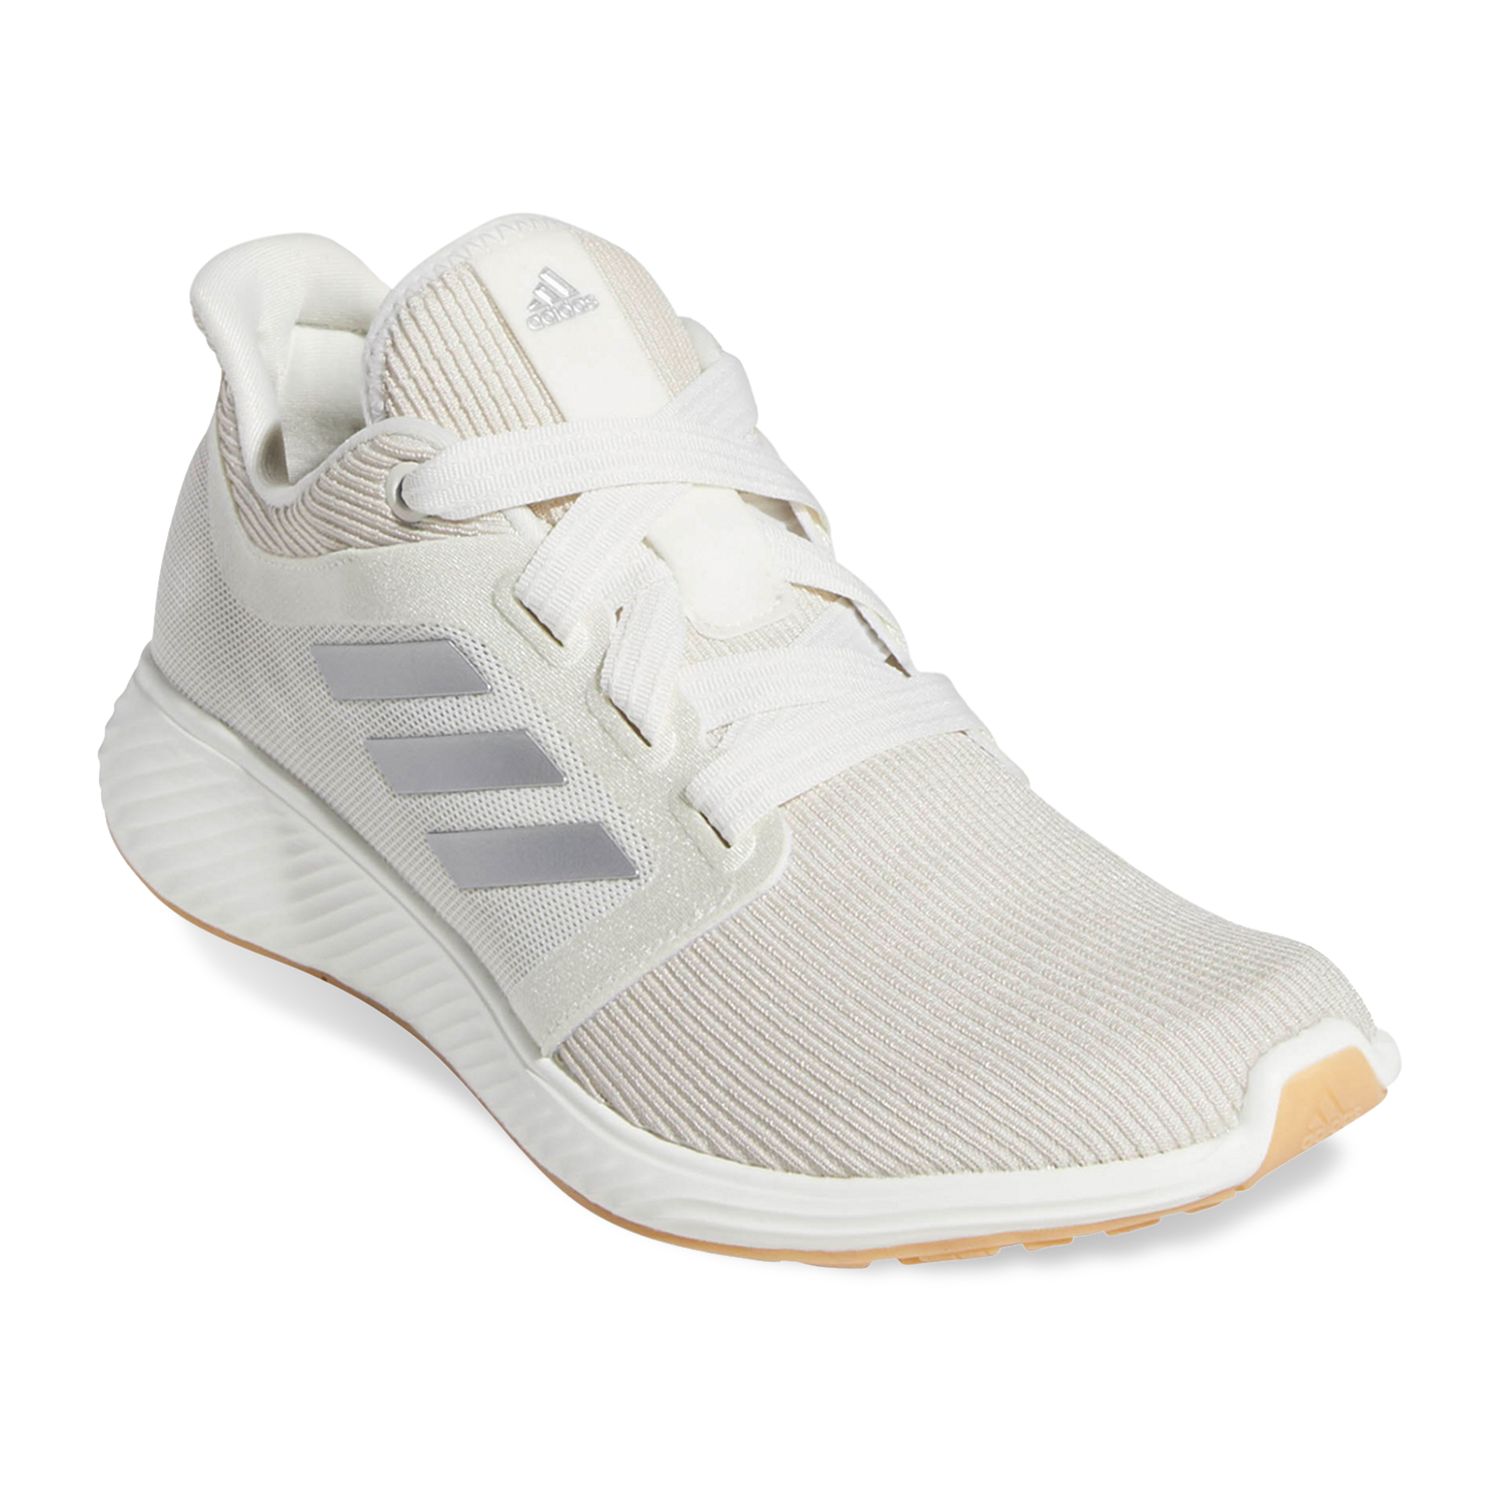 adidas edge lux shoes